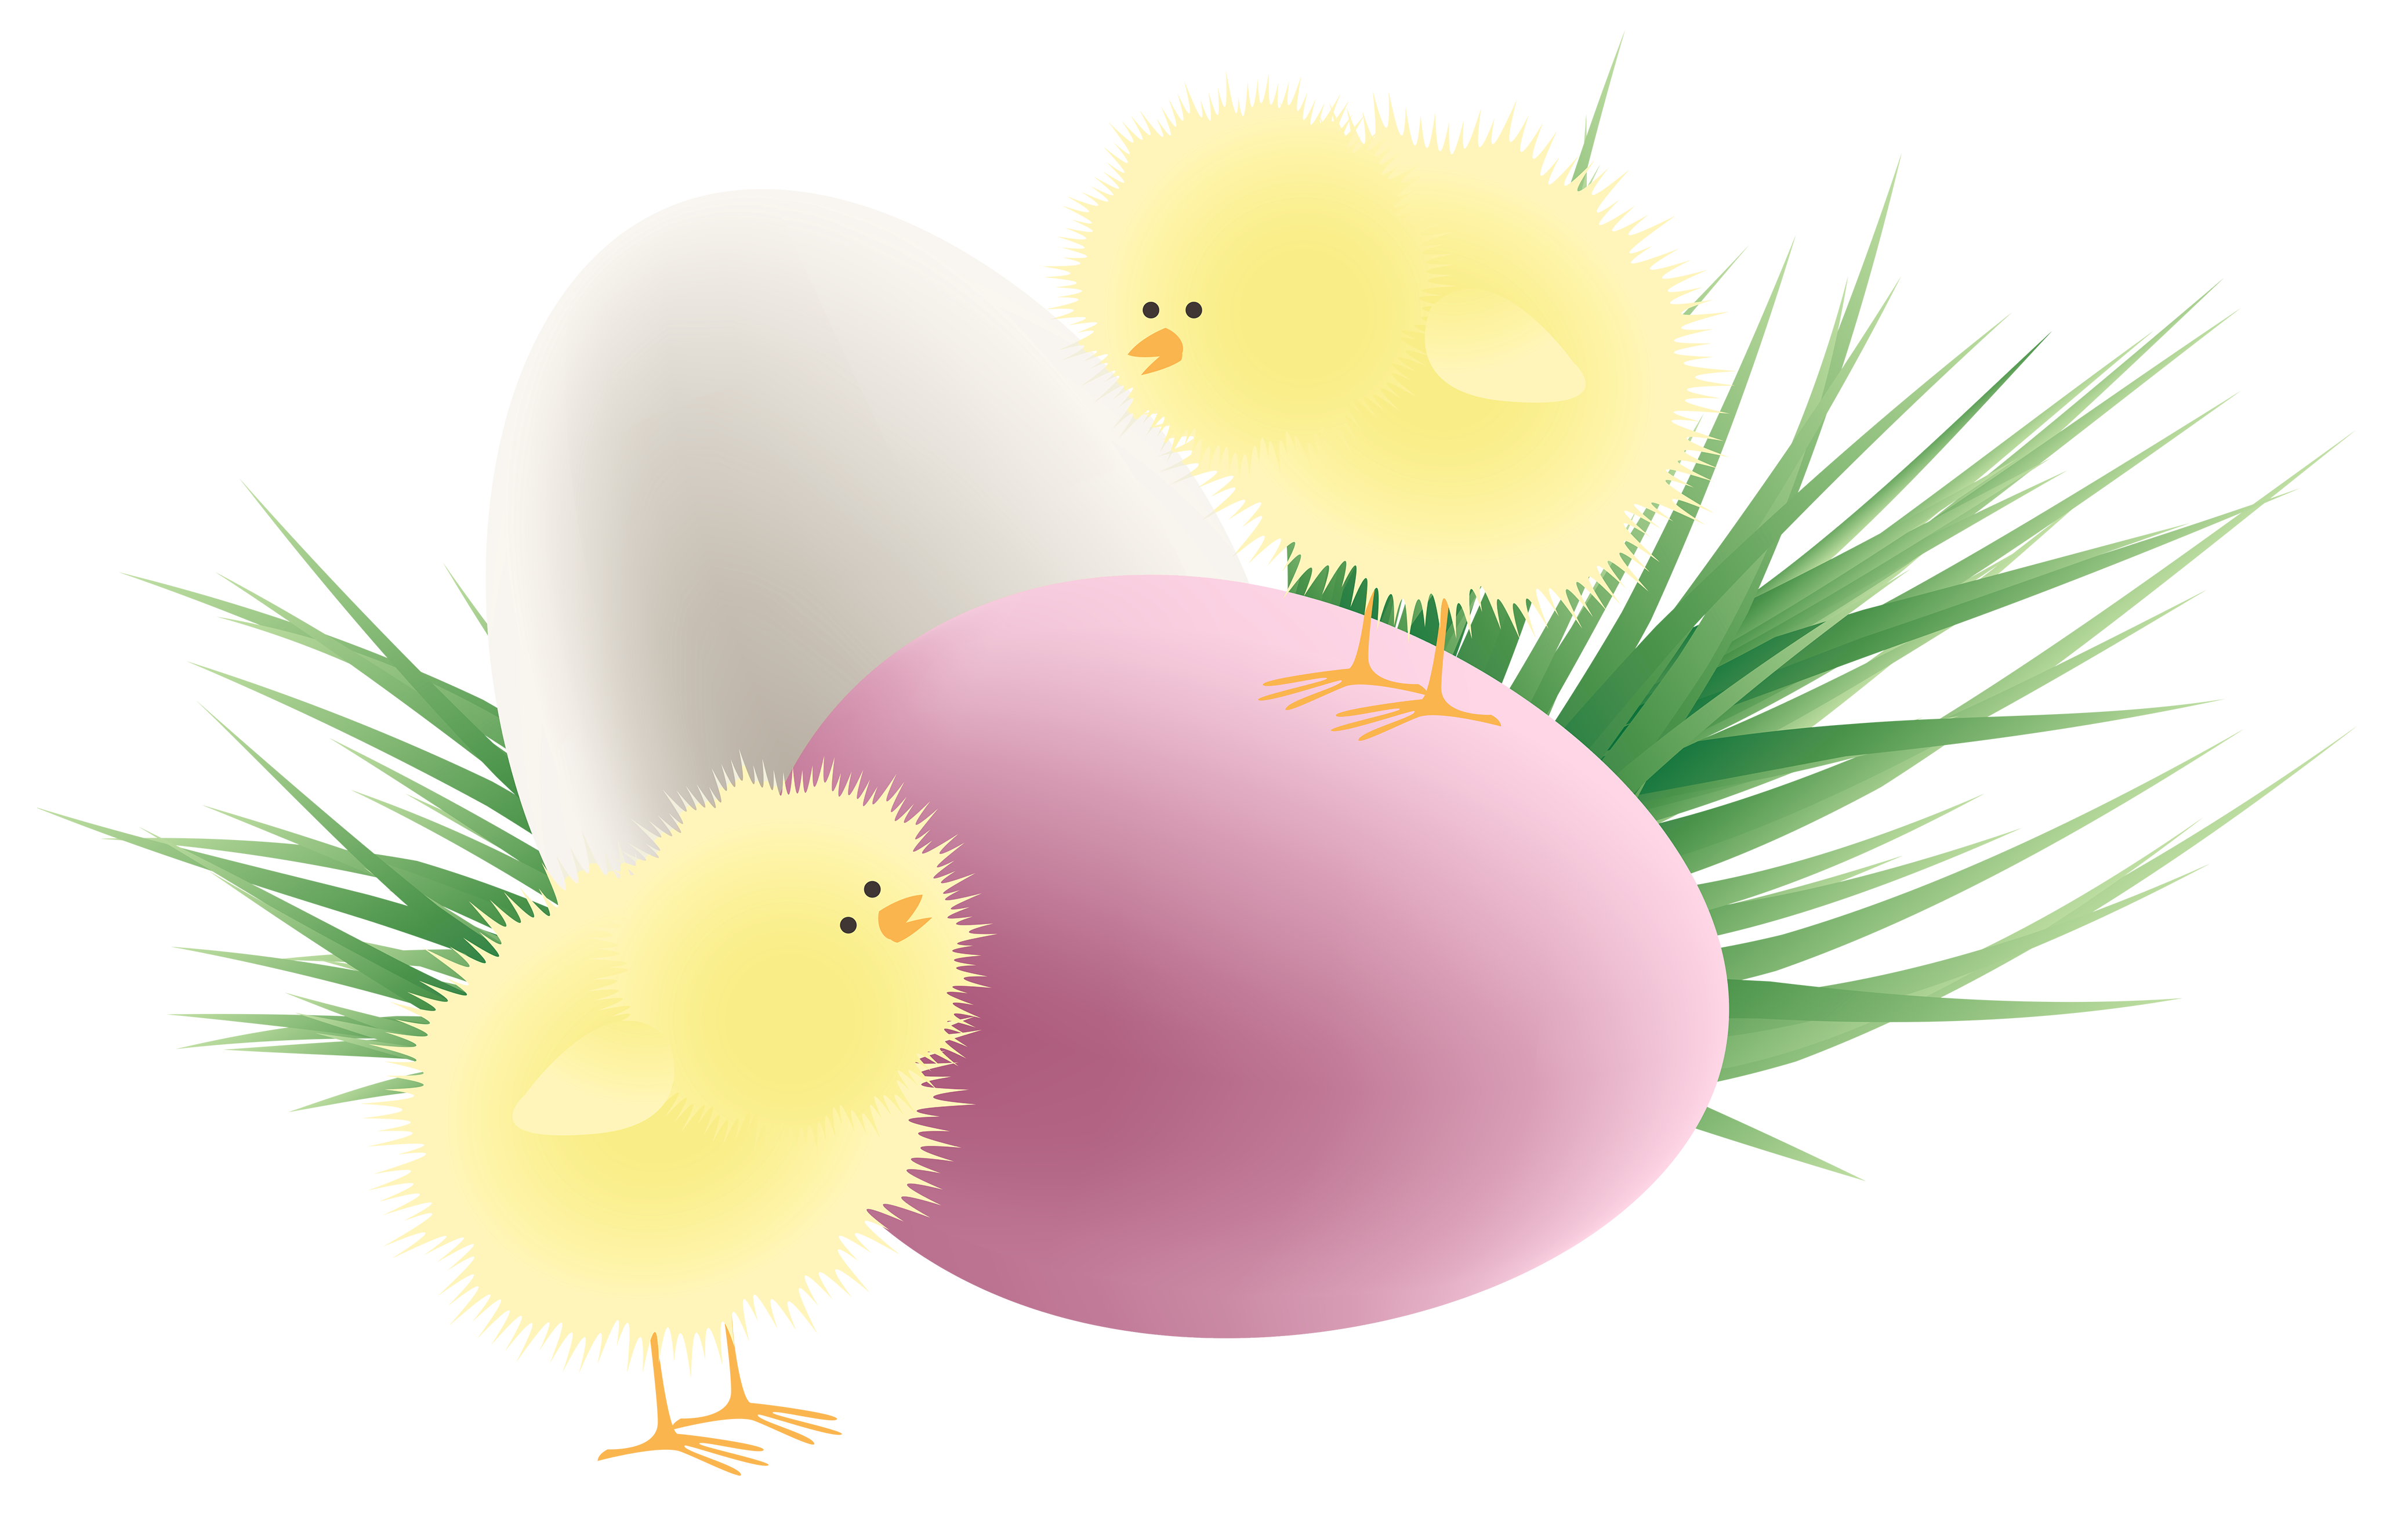 Transparent Easter Eggs and Grass PNG Clipart Picture​  Gallery  Yopriceville - High-Quality Free Images and Transparent PNG Clipart